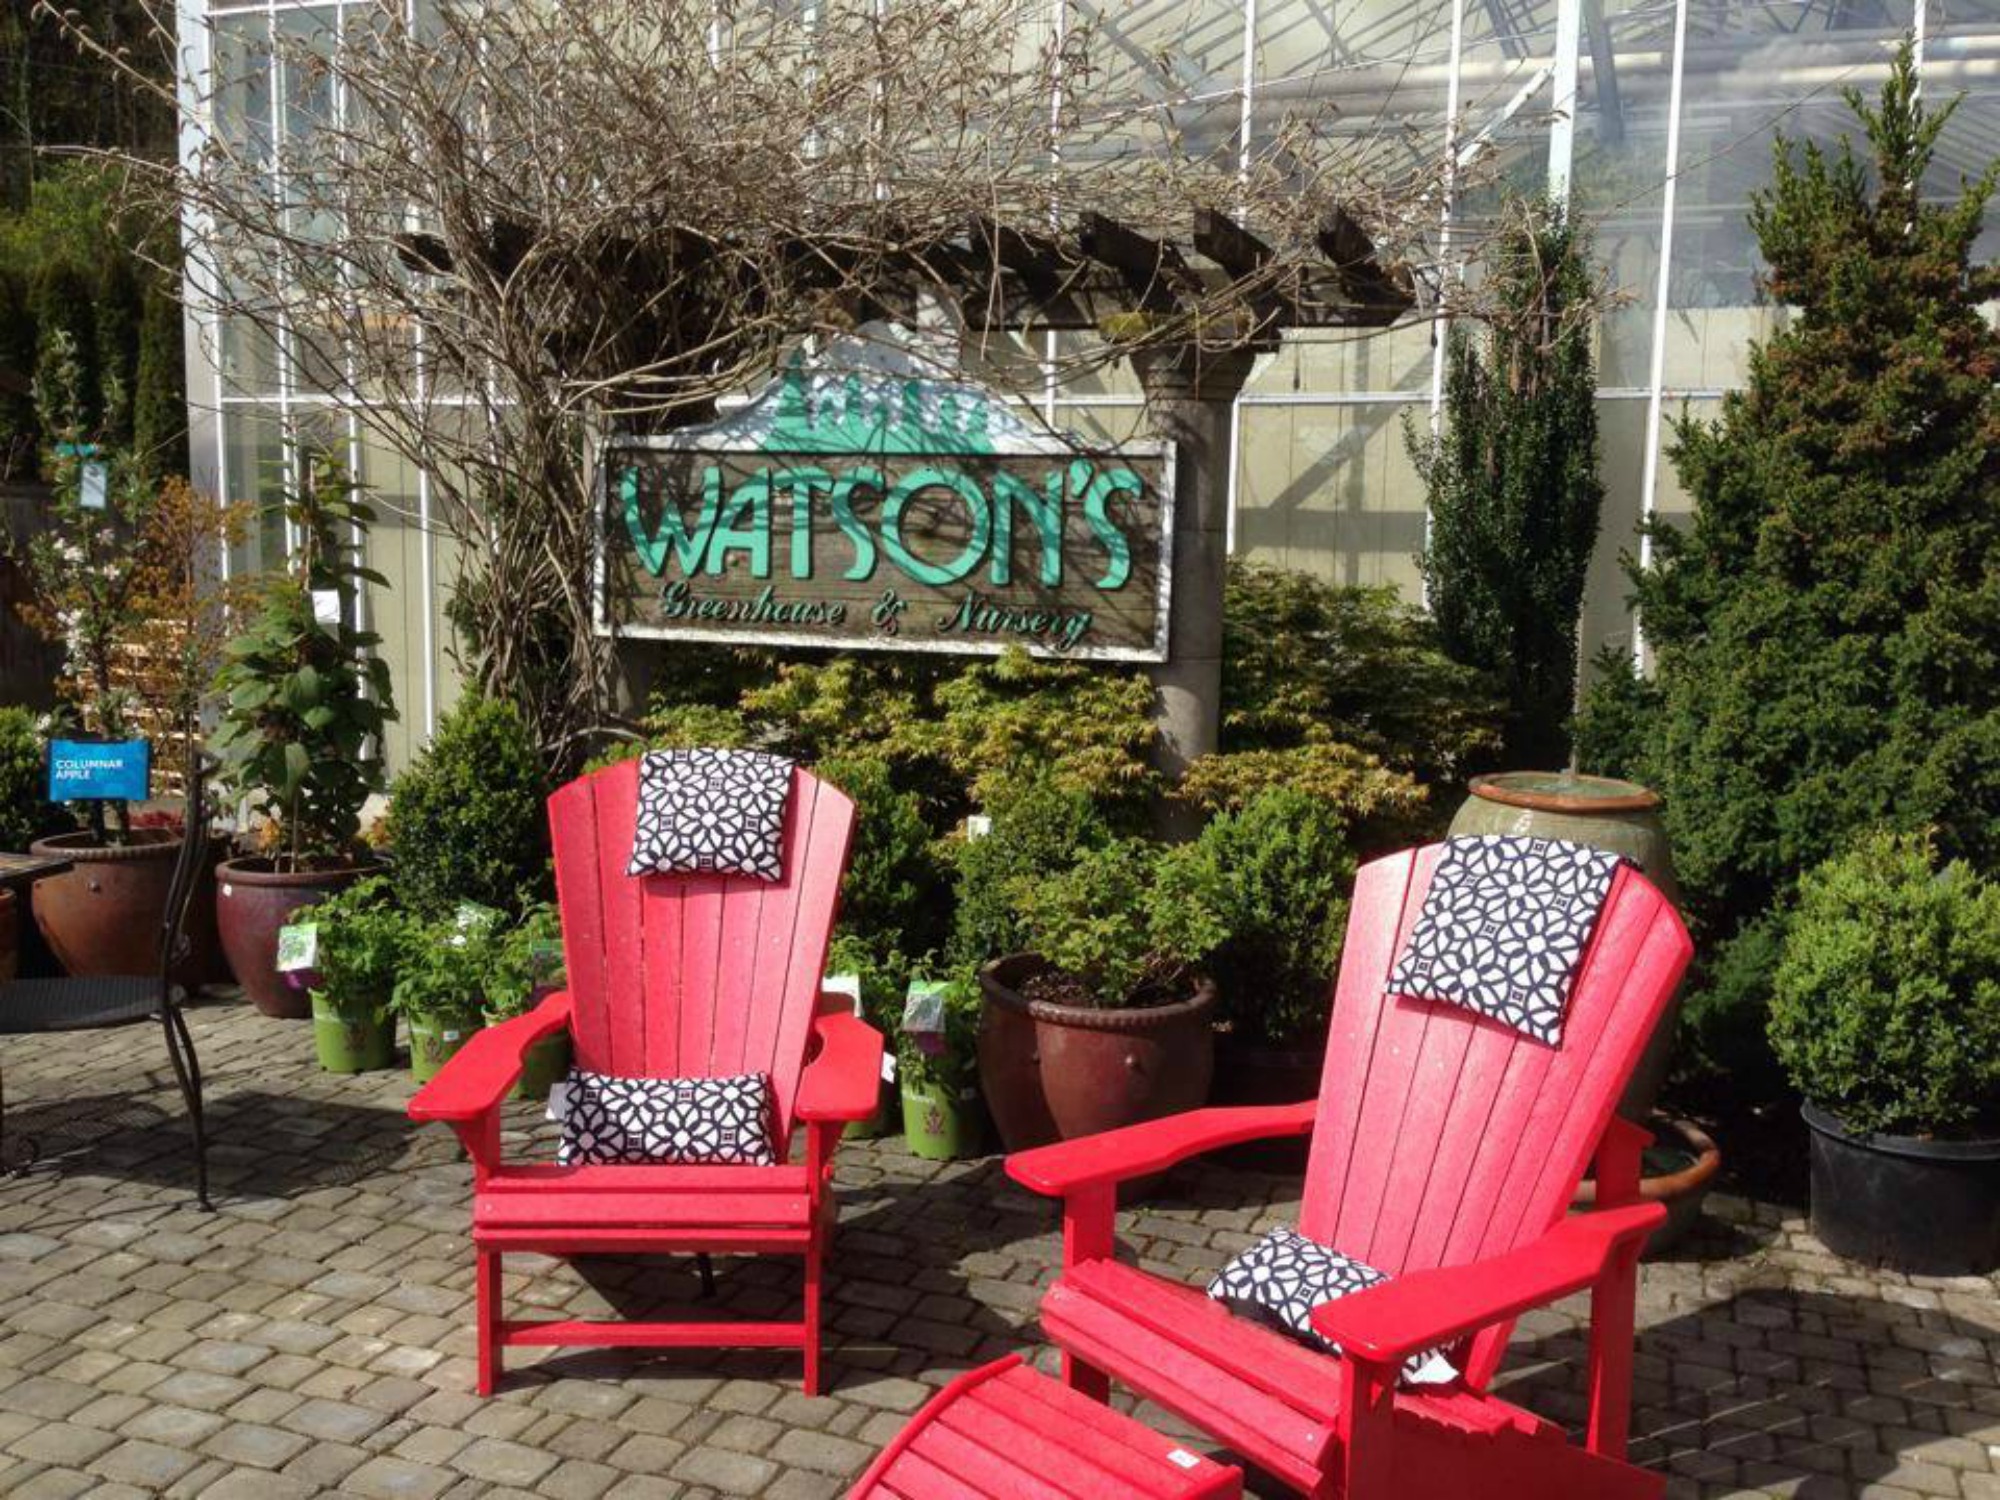 Watson S Greenhouse And Nursery Offers Plants Classes Events And